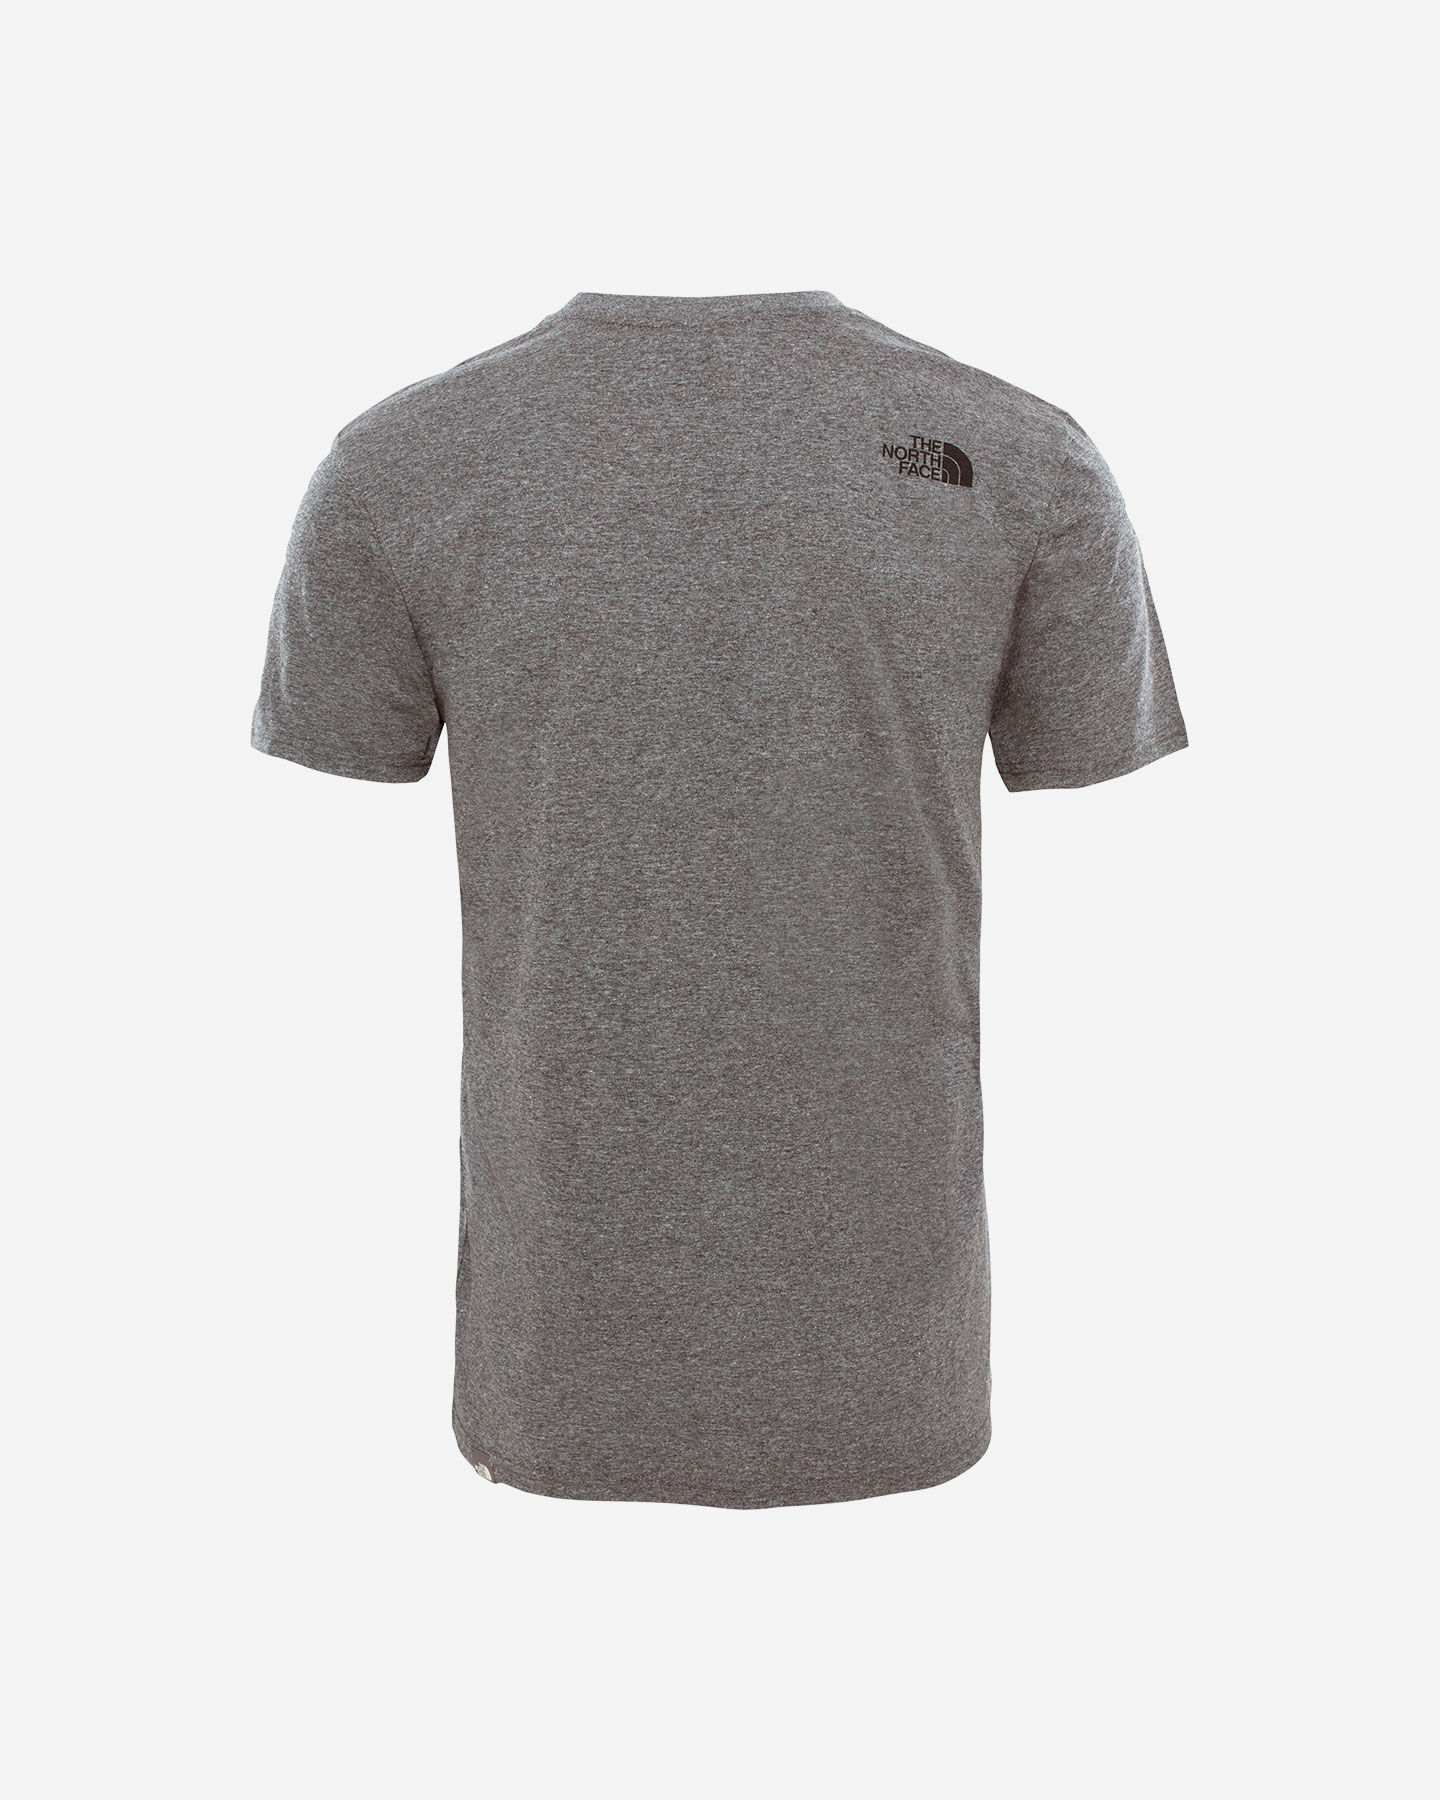  T-Shirt THE NORTH FACE SIMPLE DOME M S5015382|JBV|XXS scatto 1